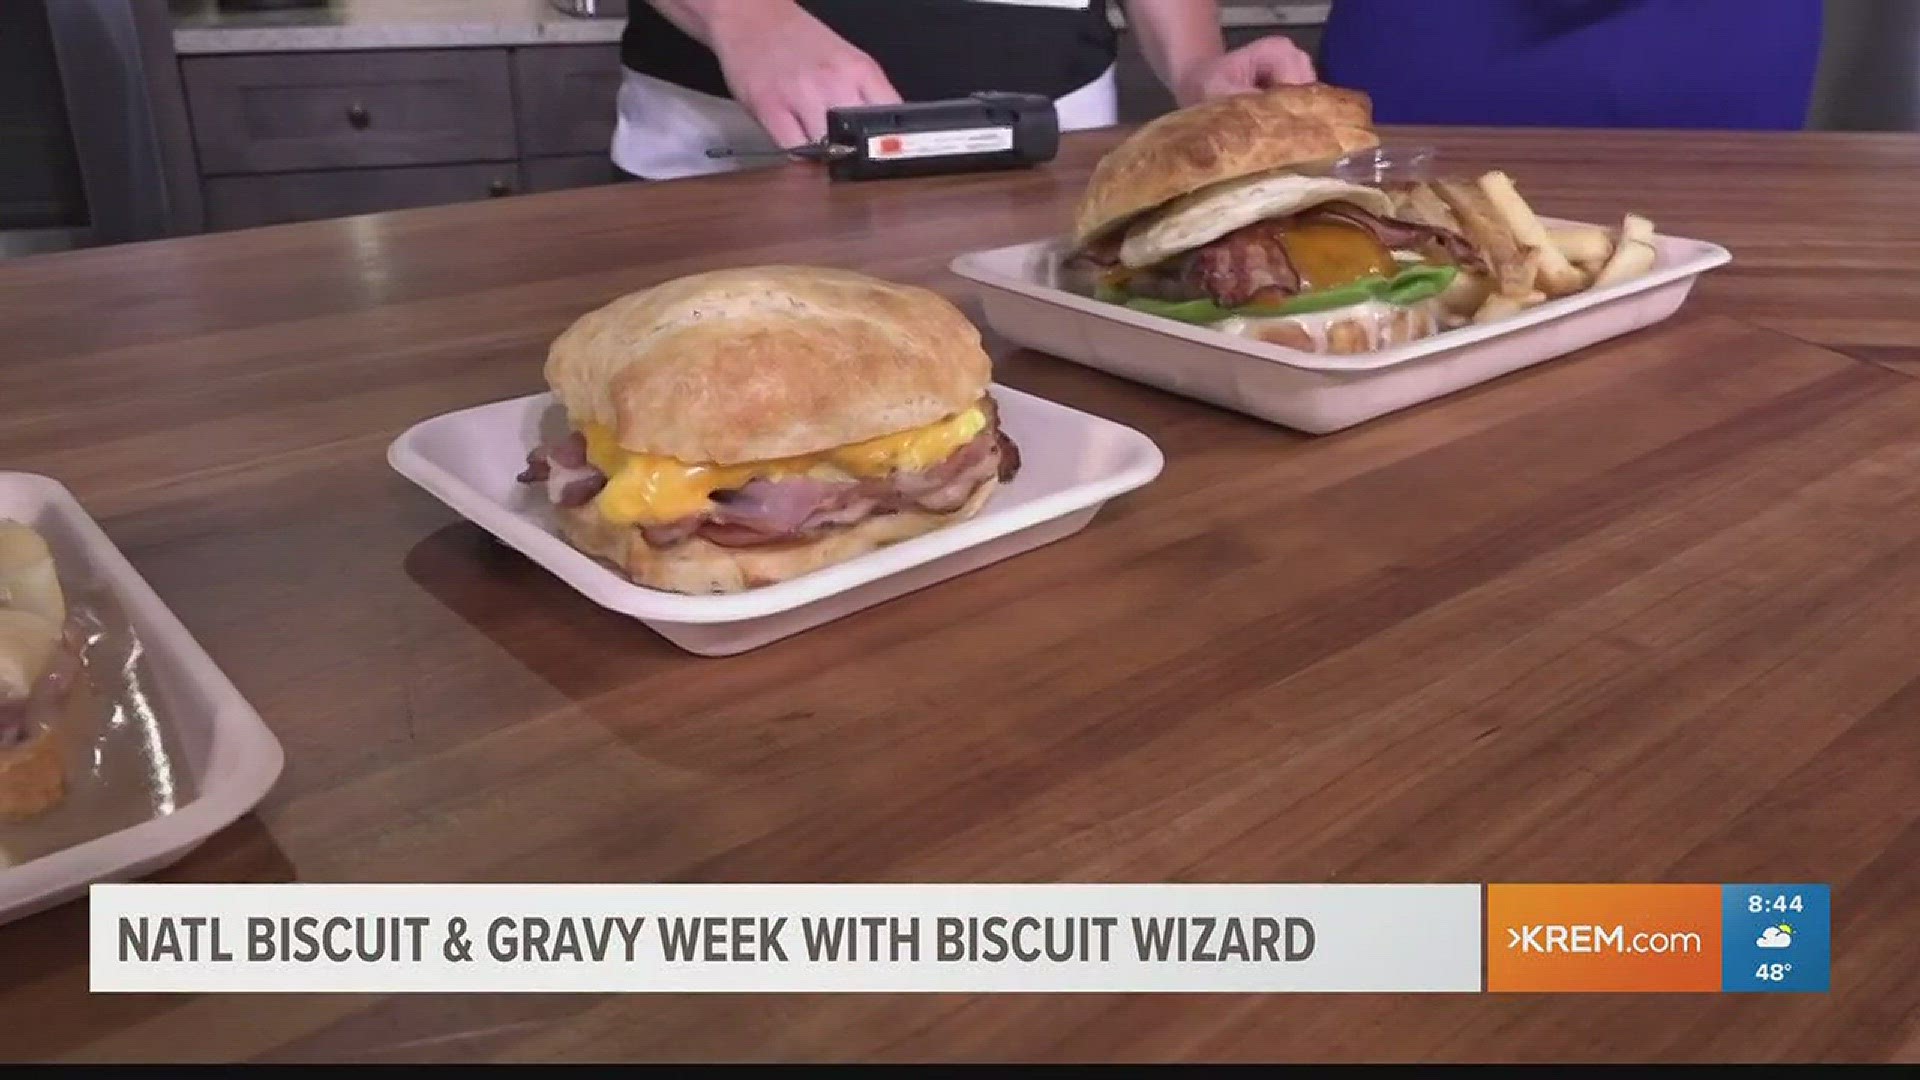 Biscuit Wizard offers special biscuit burger for national biscuits and gravy week. Made with locally sourced ingredients.